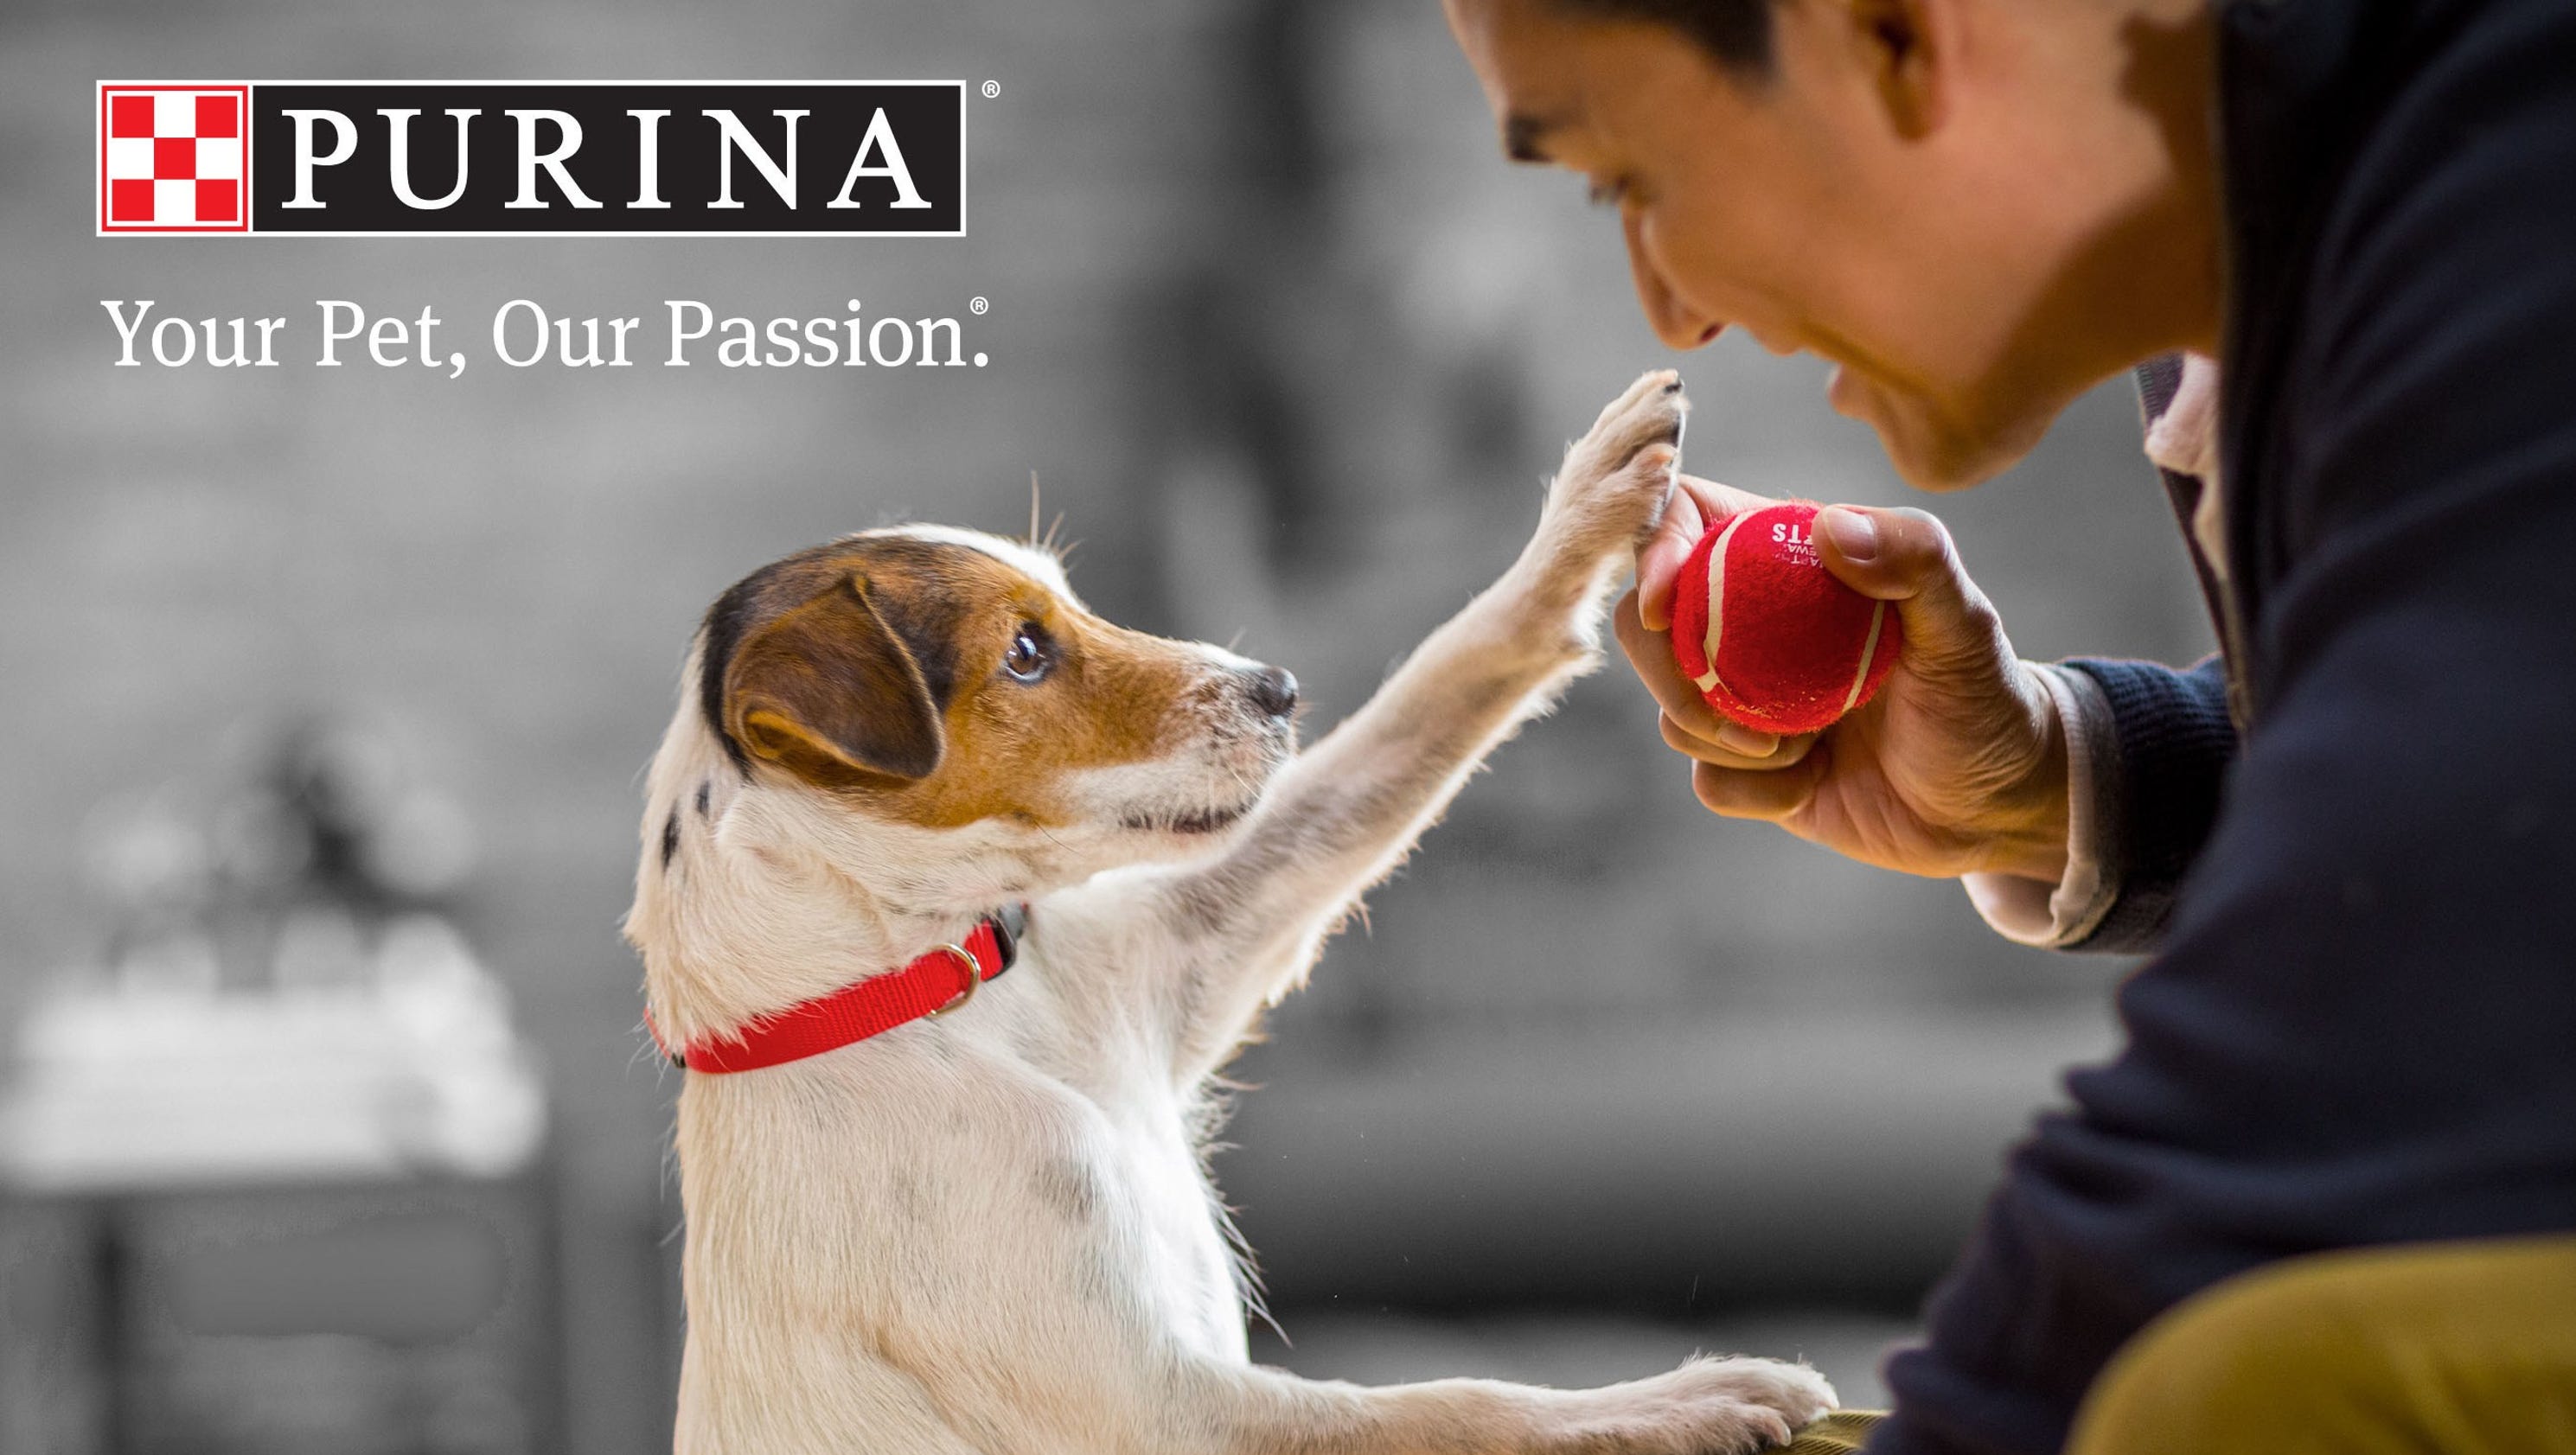 Lawsuit claims Purina brand is killing dogs